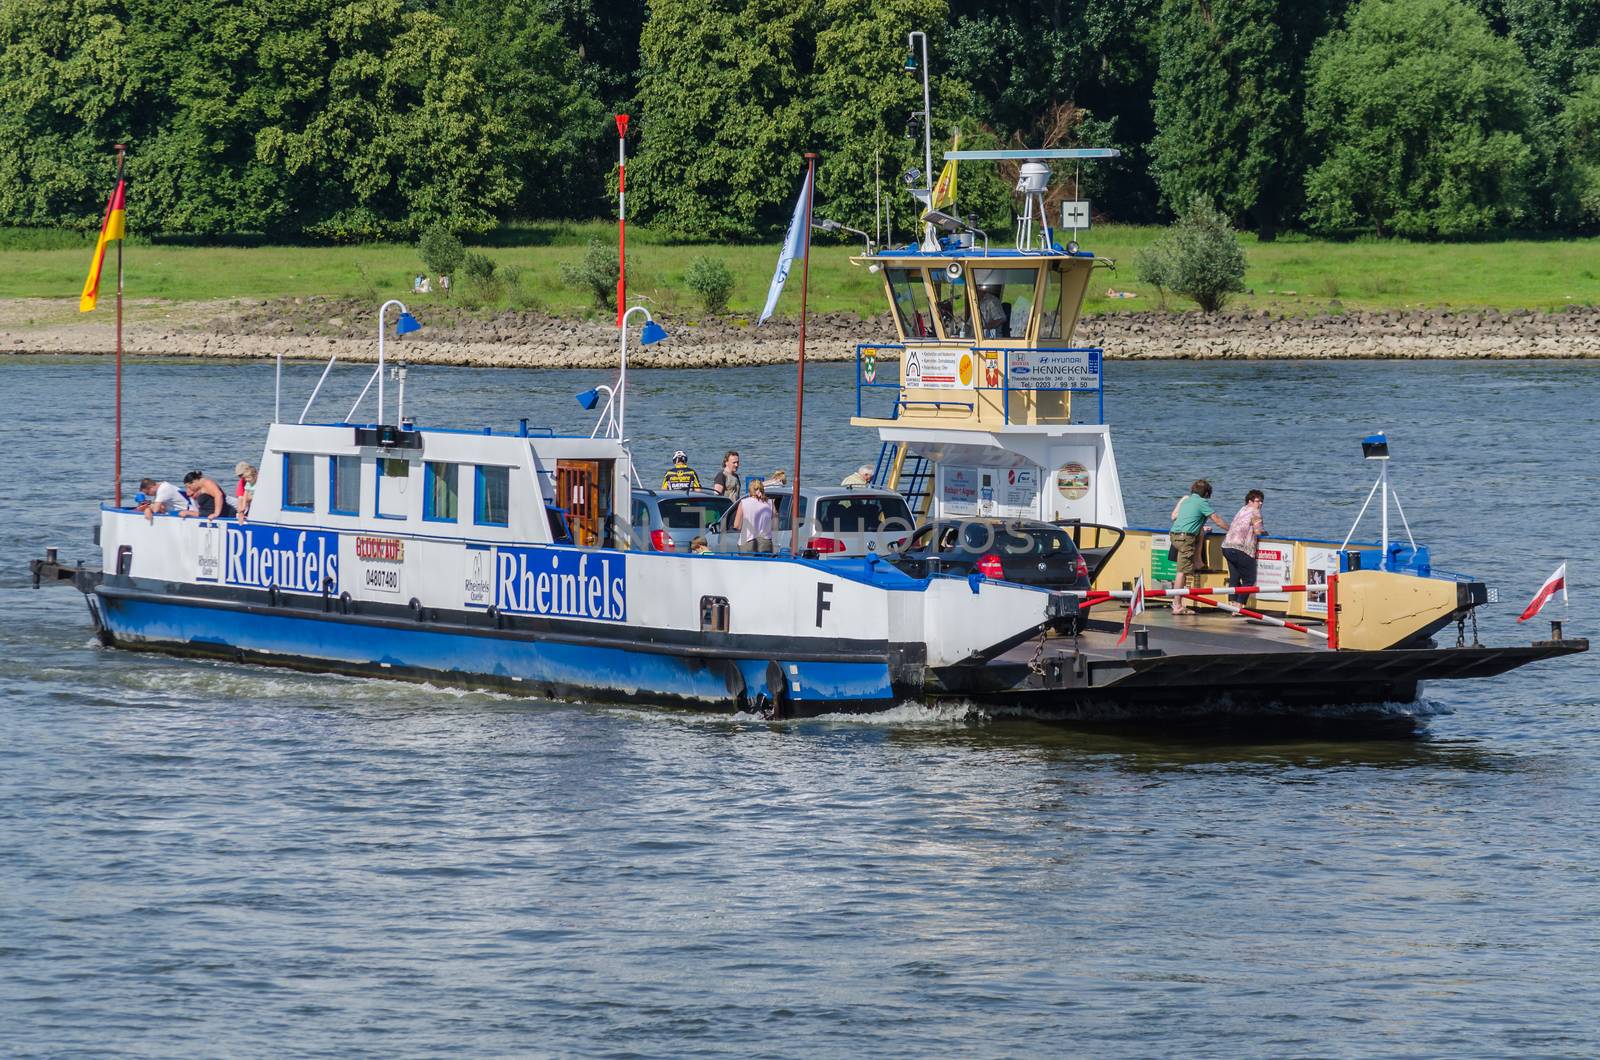 Ferry "City Orsoy on the Rhine." by JFsPic